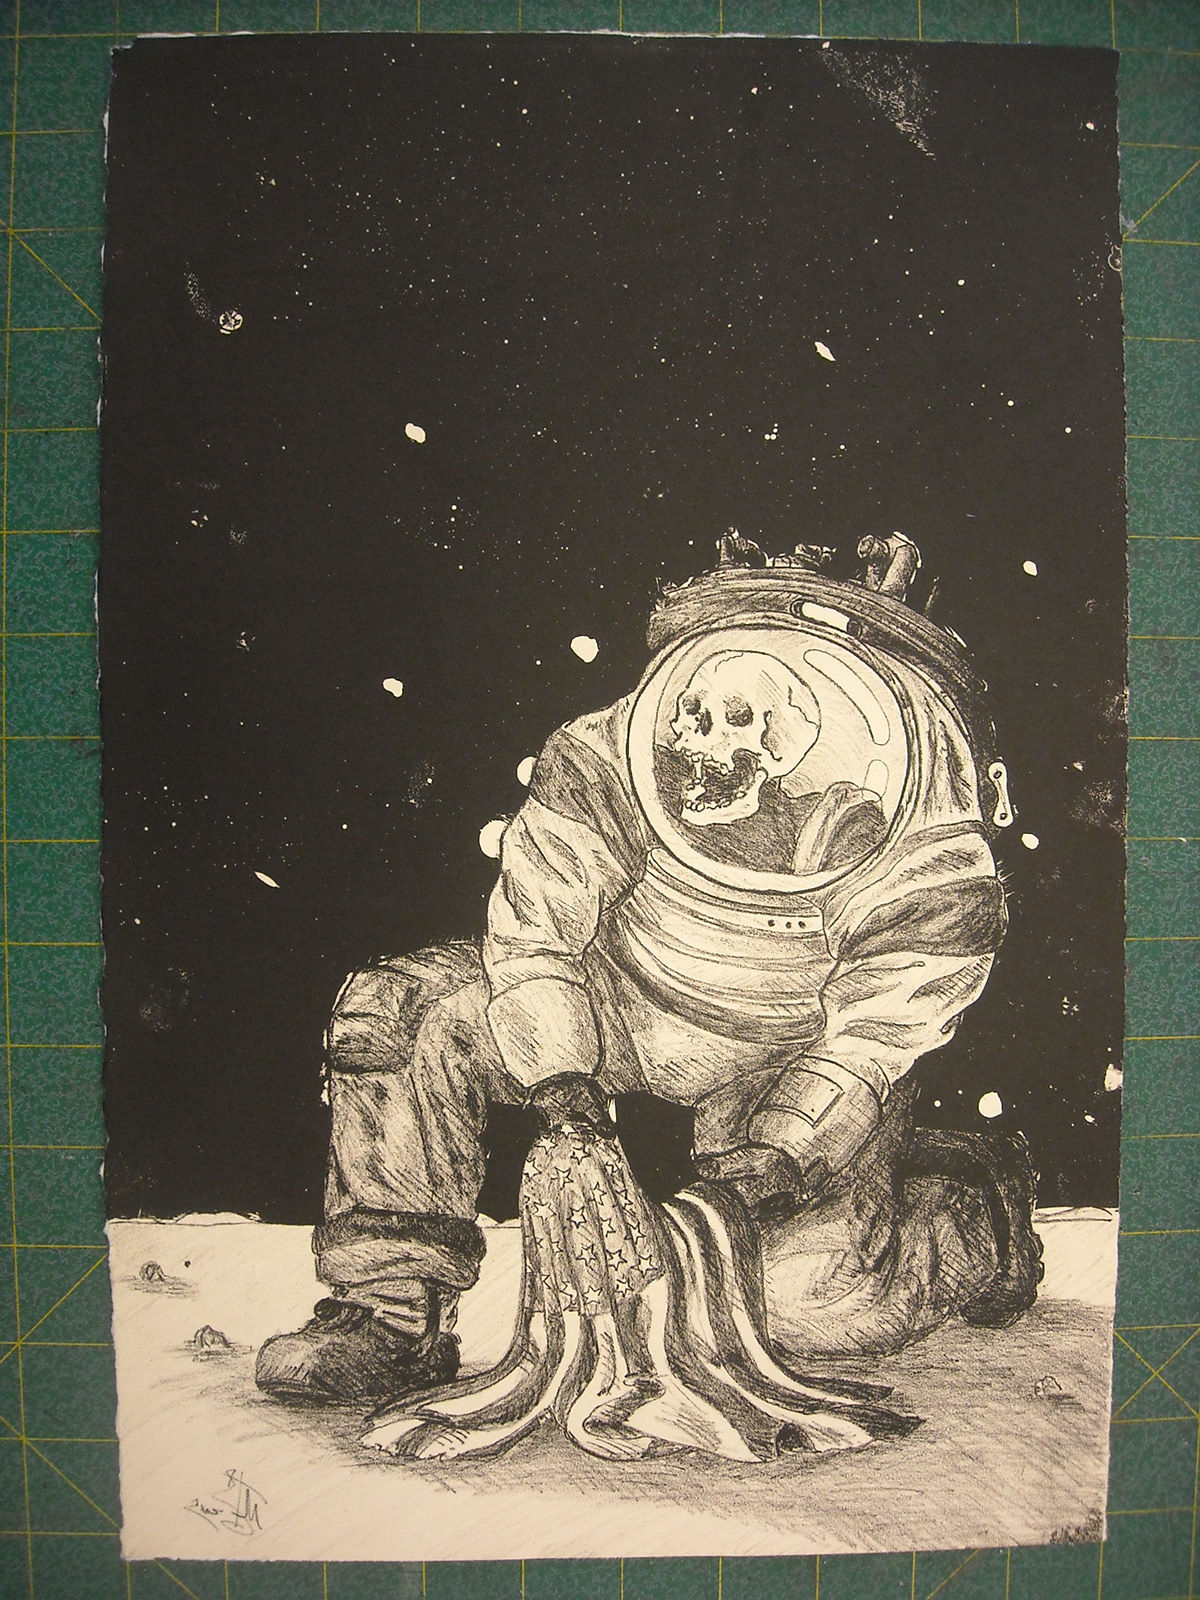 lithography lithograph skeleton astronaut